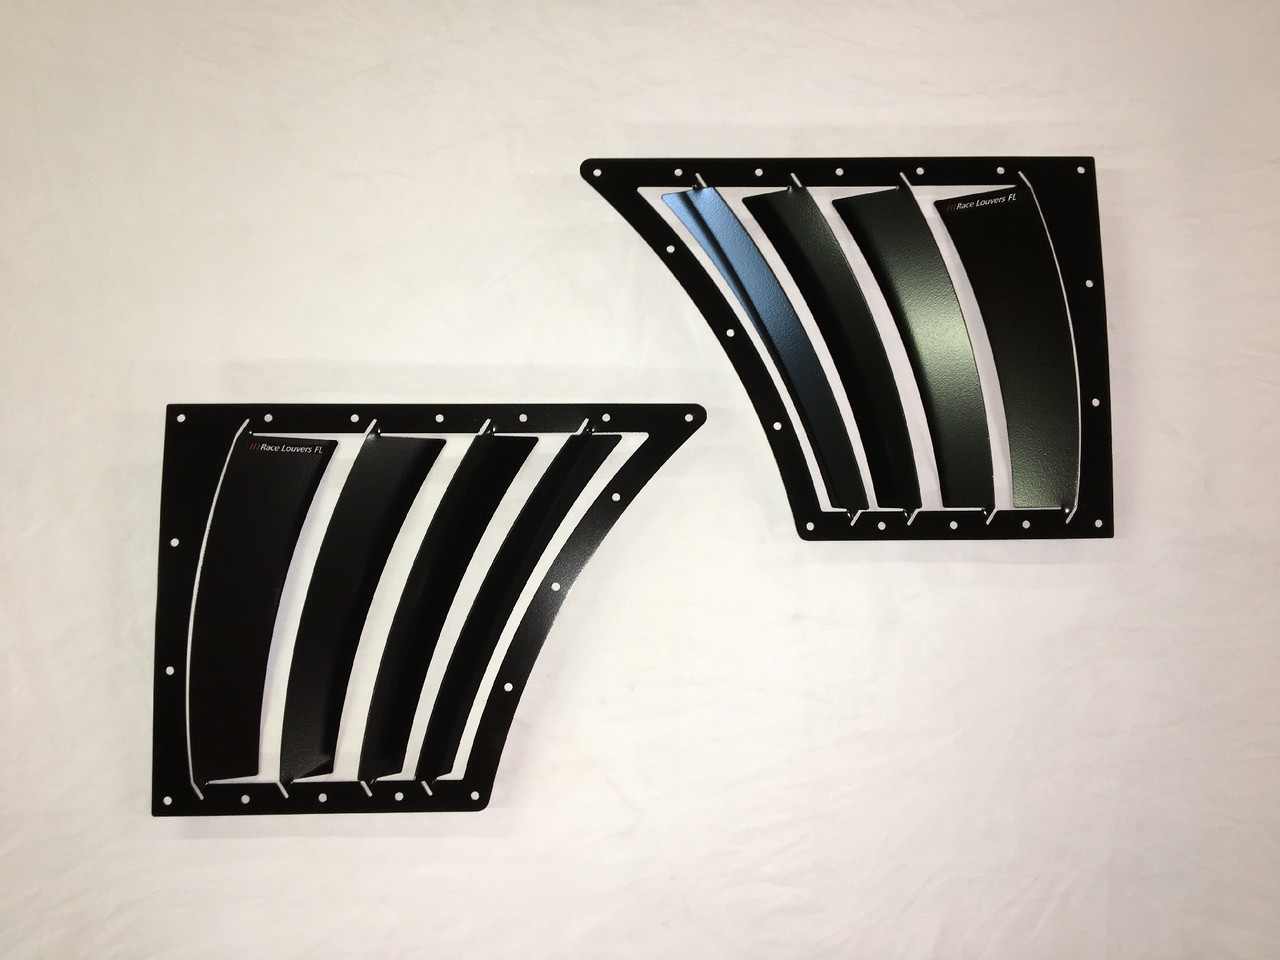 Race Louvers Fender Louvers designed to increase engine and brake cooling while increasing front downforce